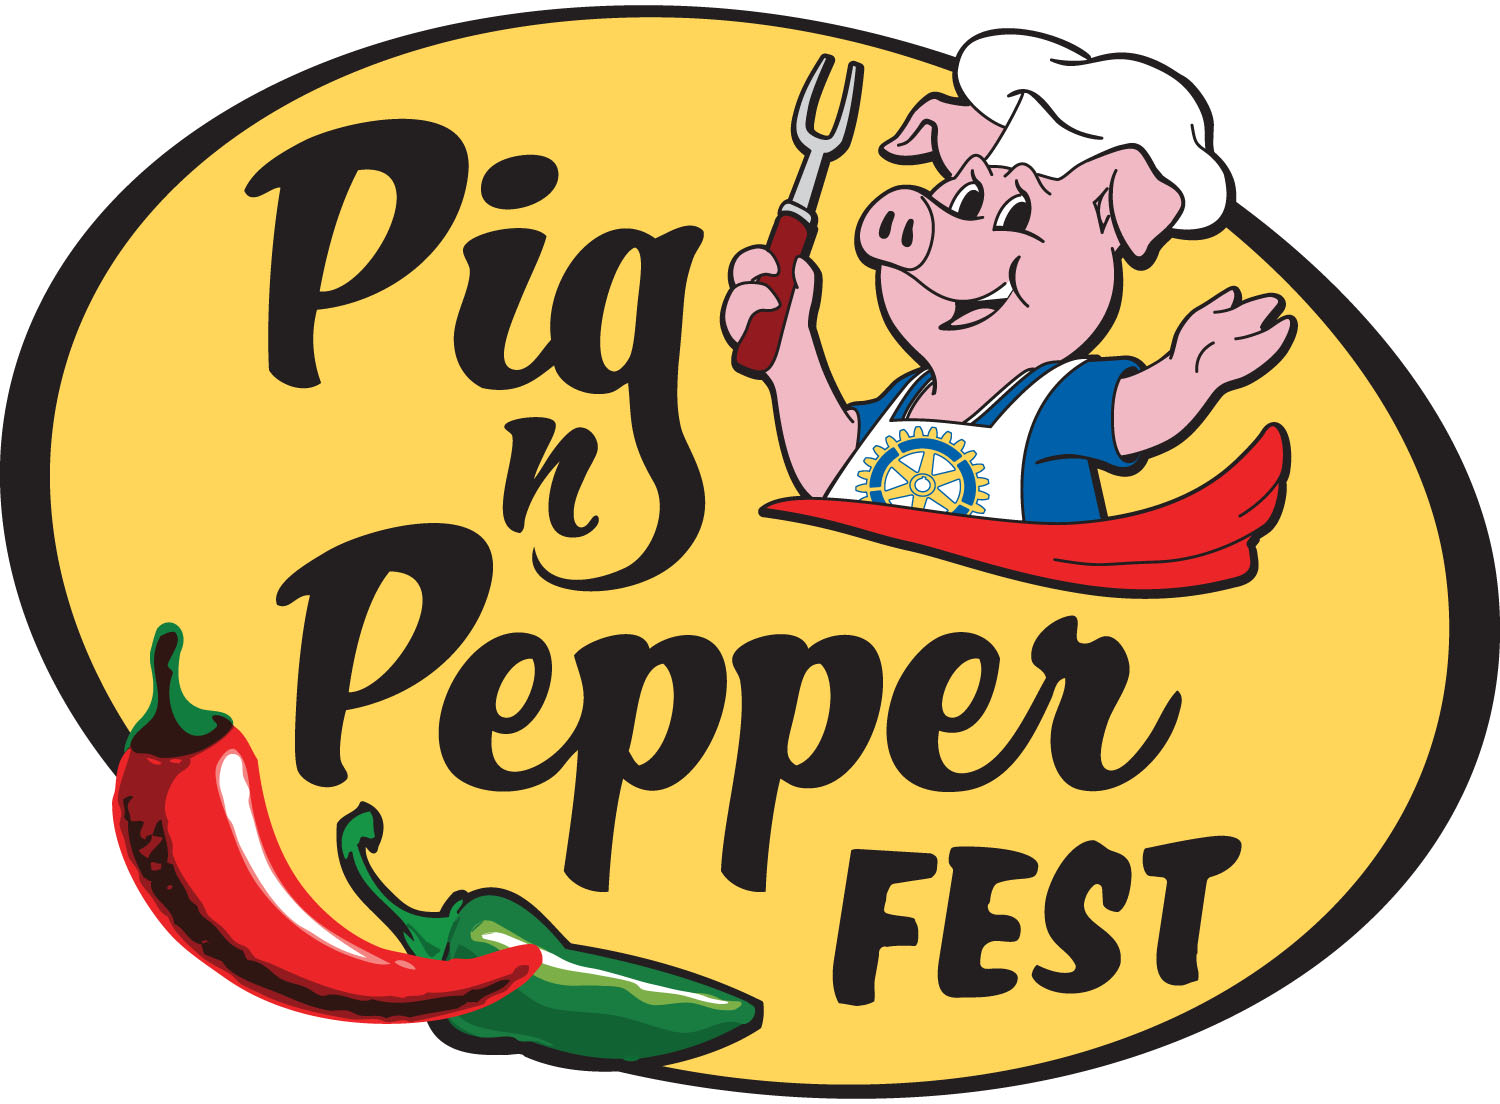 barbecue clipart pig - photo #48